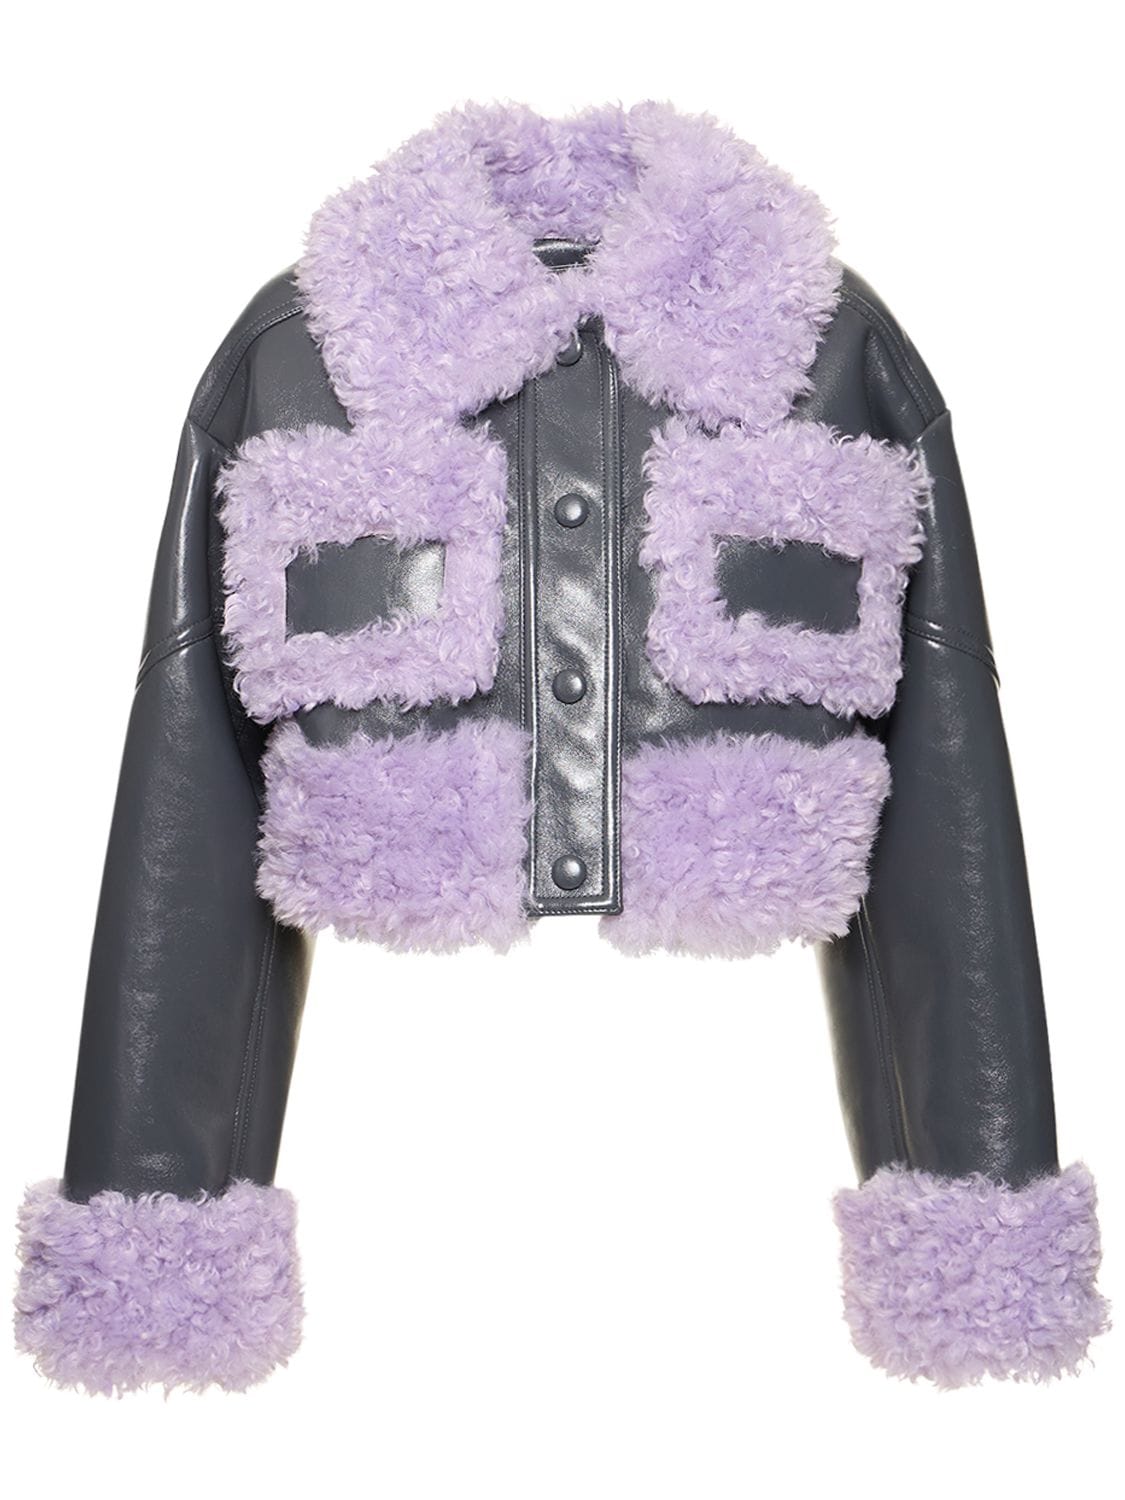 STAND STUDIO FLEUR CROPPED FAUX SHEARLING JACKET